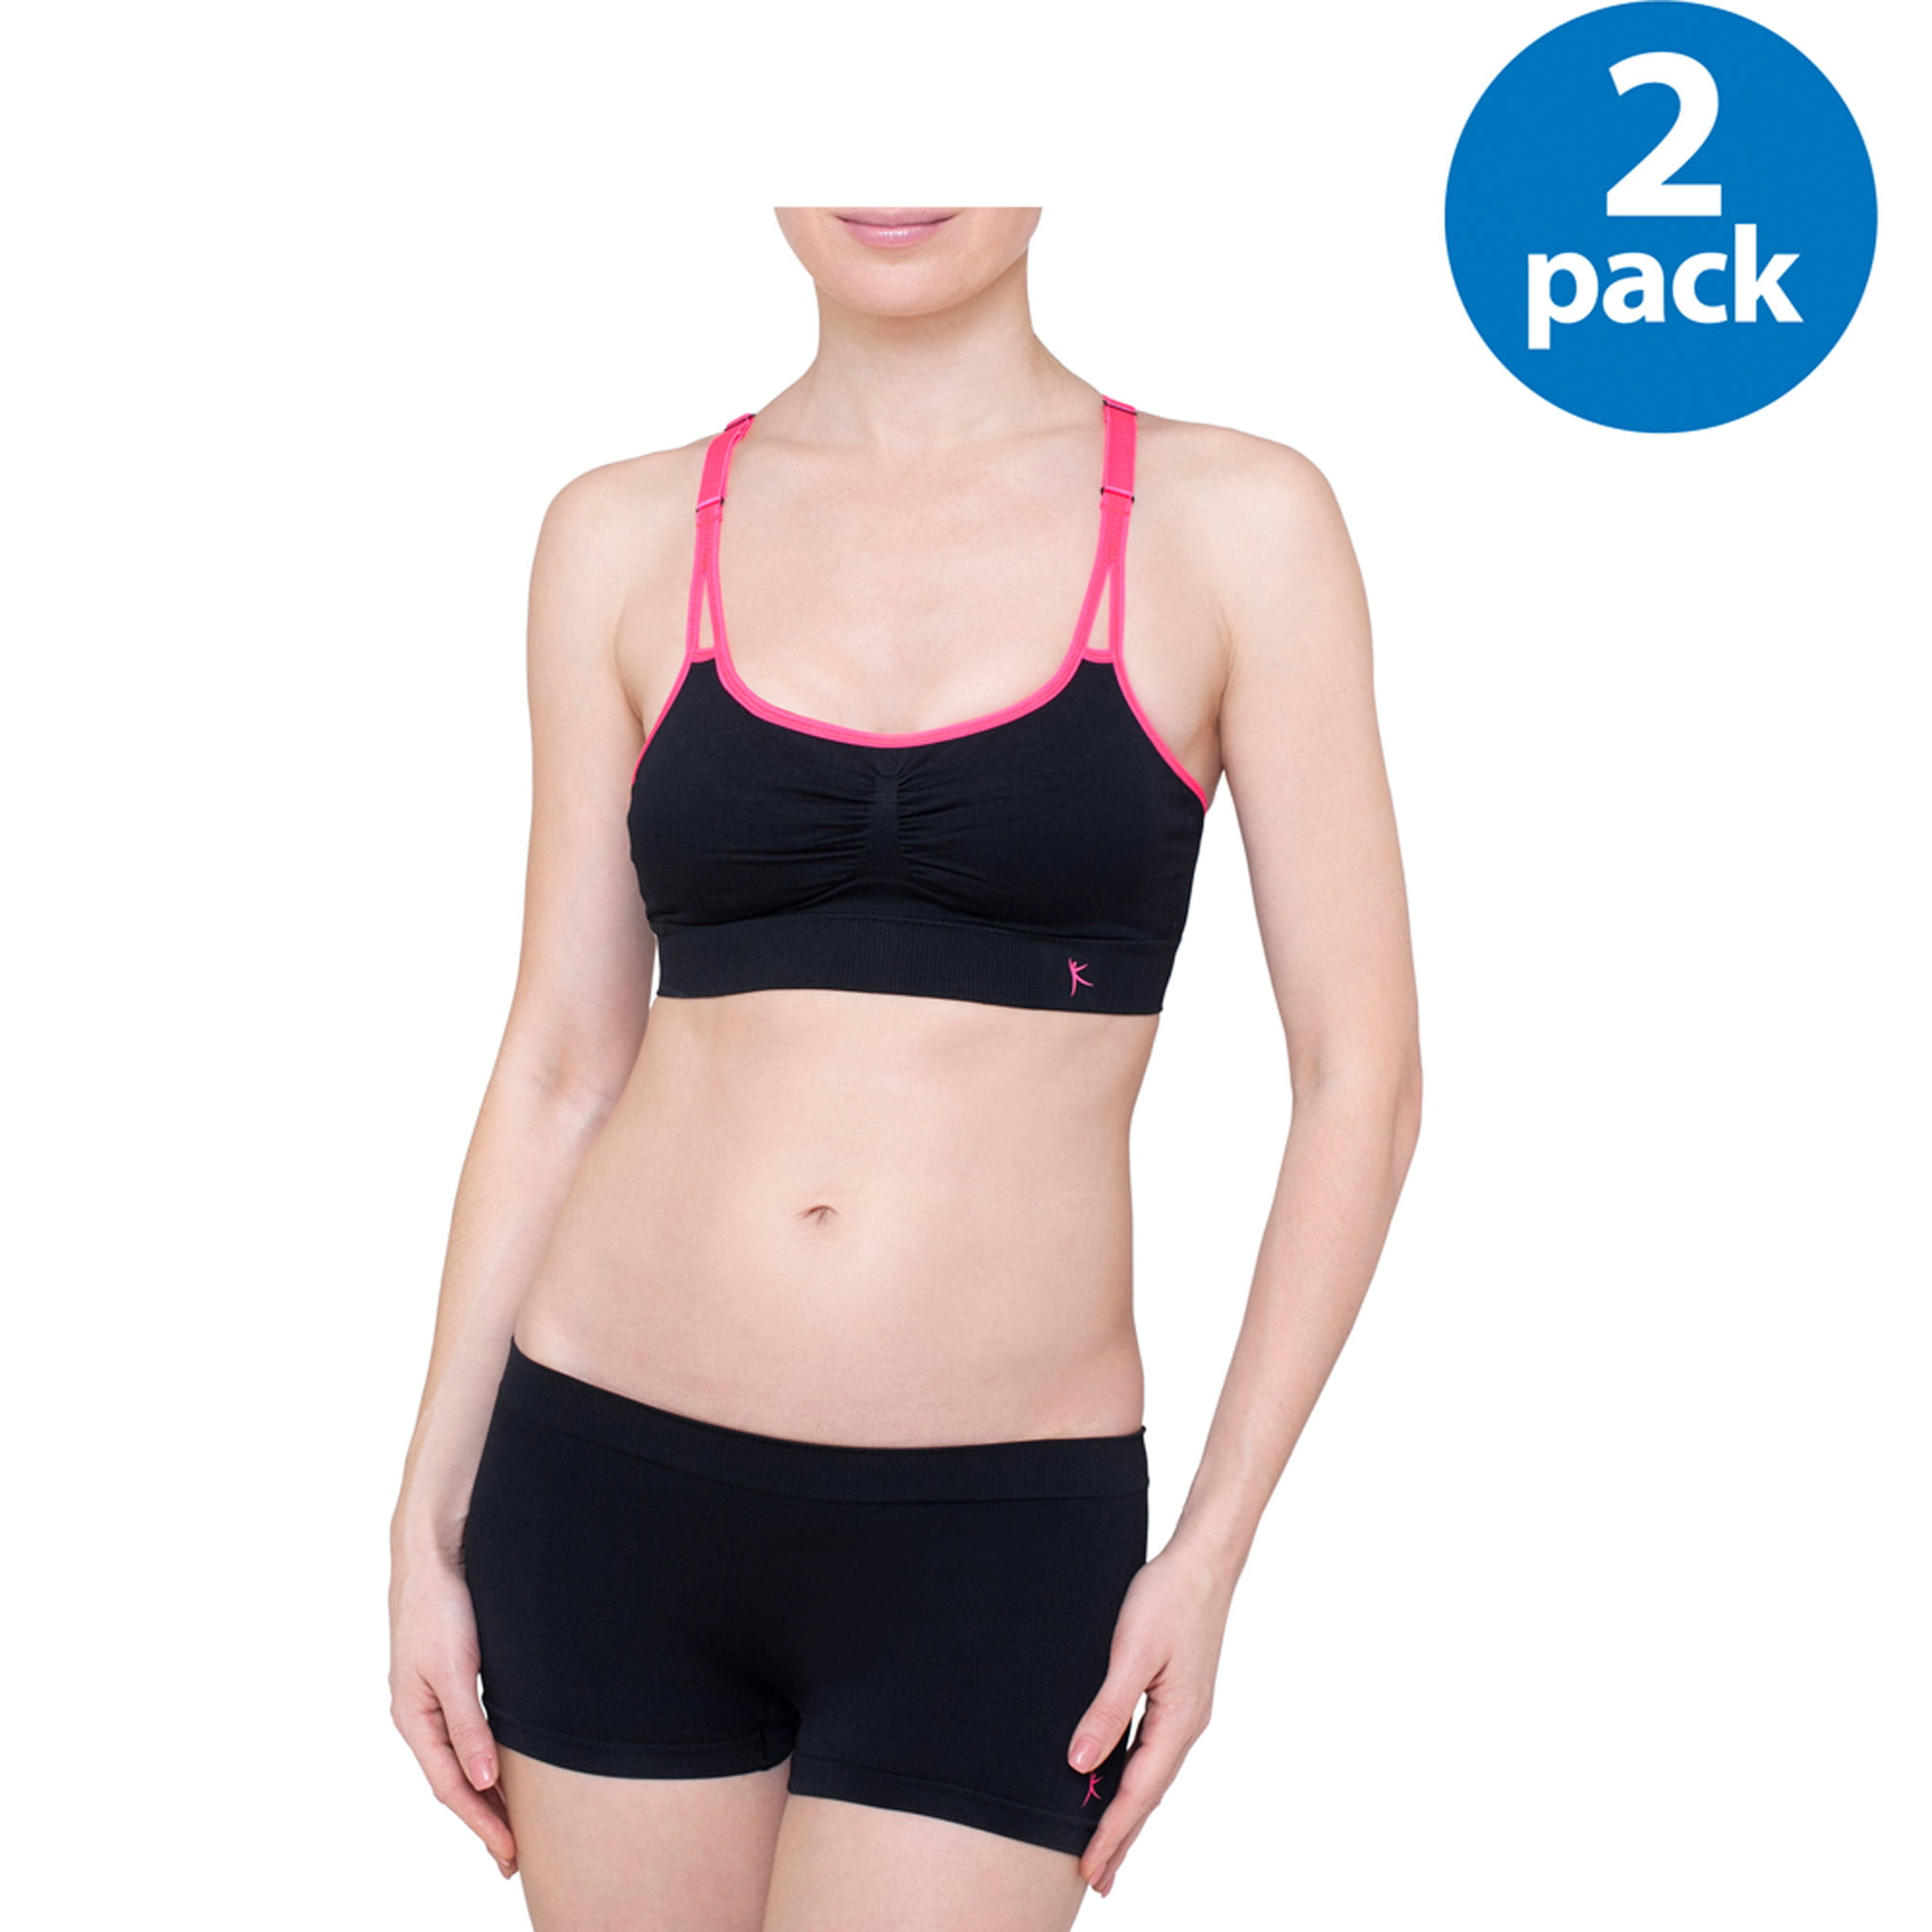 BRAND NEW 2 PACK PRO FIT PADDED SPORTS BRA GREAT FOR GYM  SIZE MEDIUM